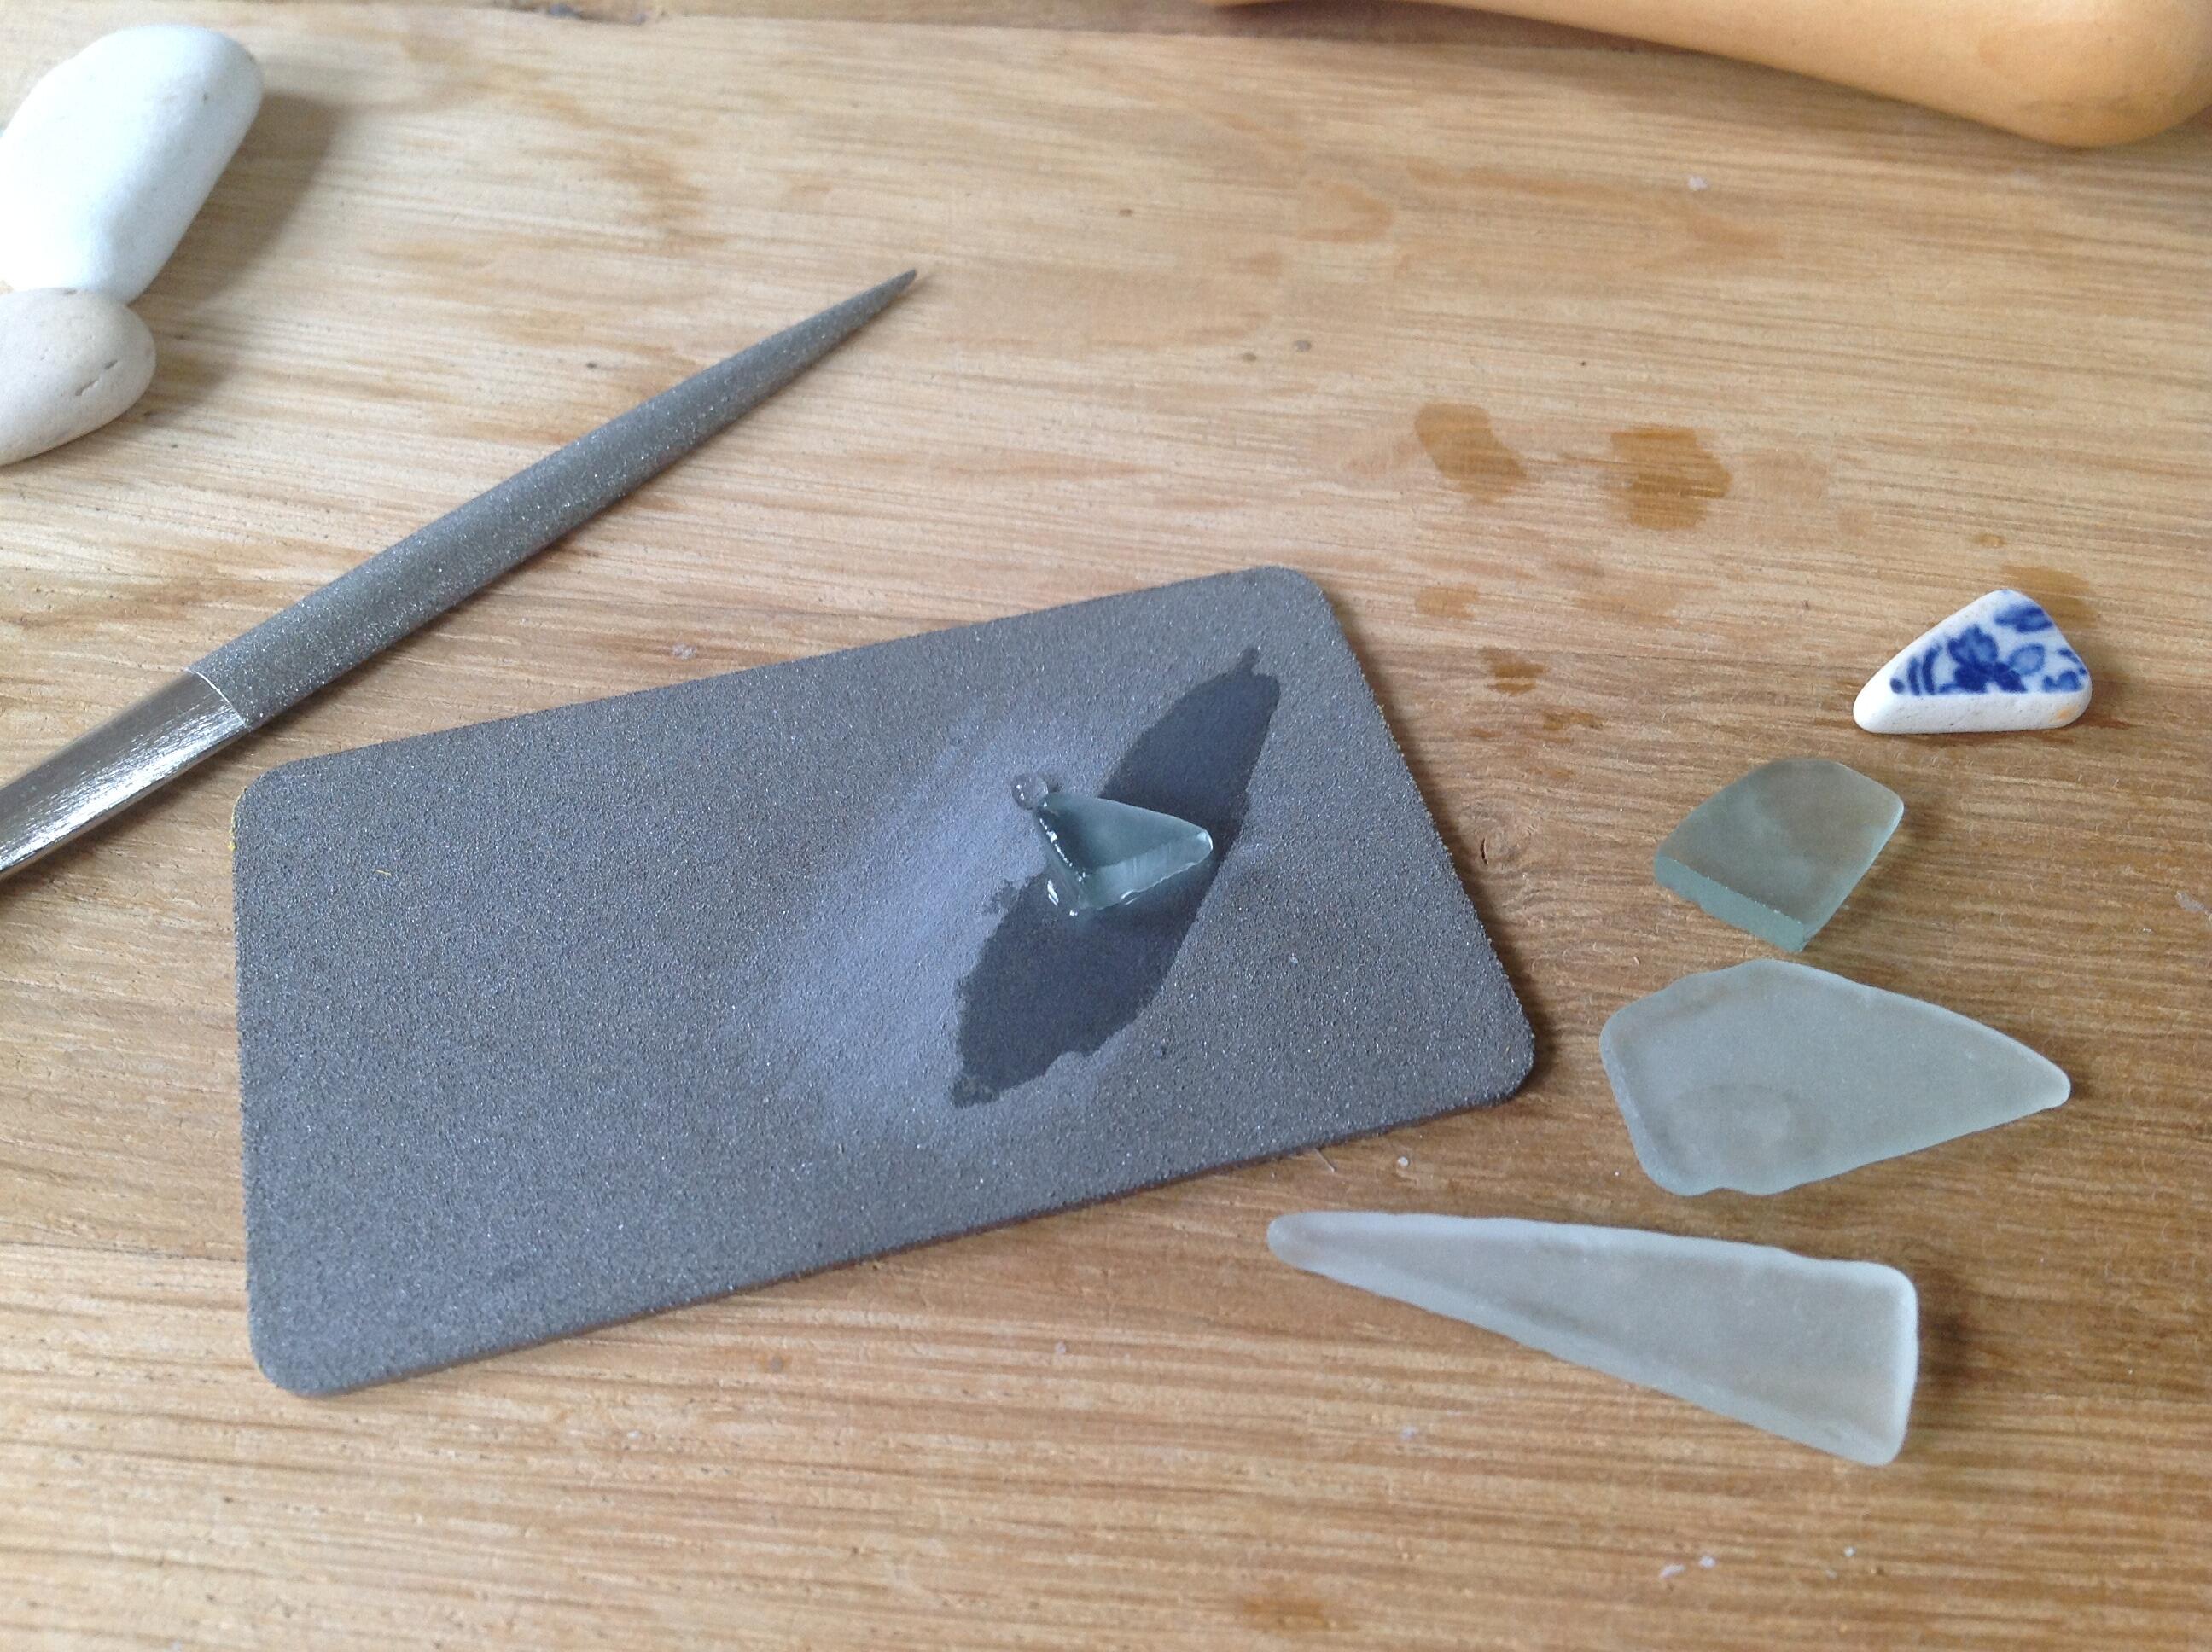 Smoothing cabochons and sea glass pieces on a diamond hone